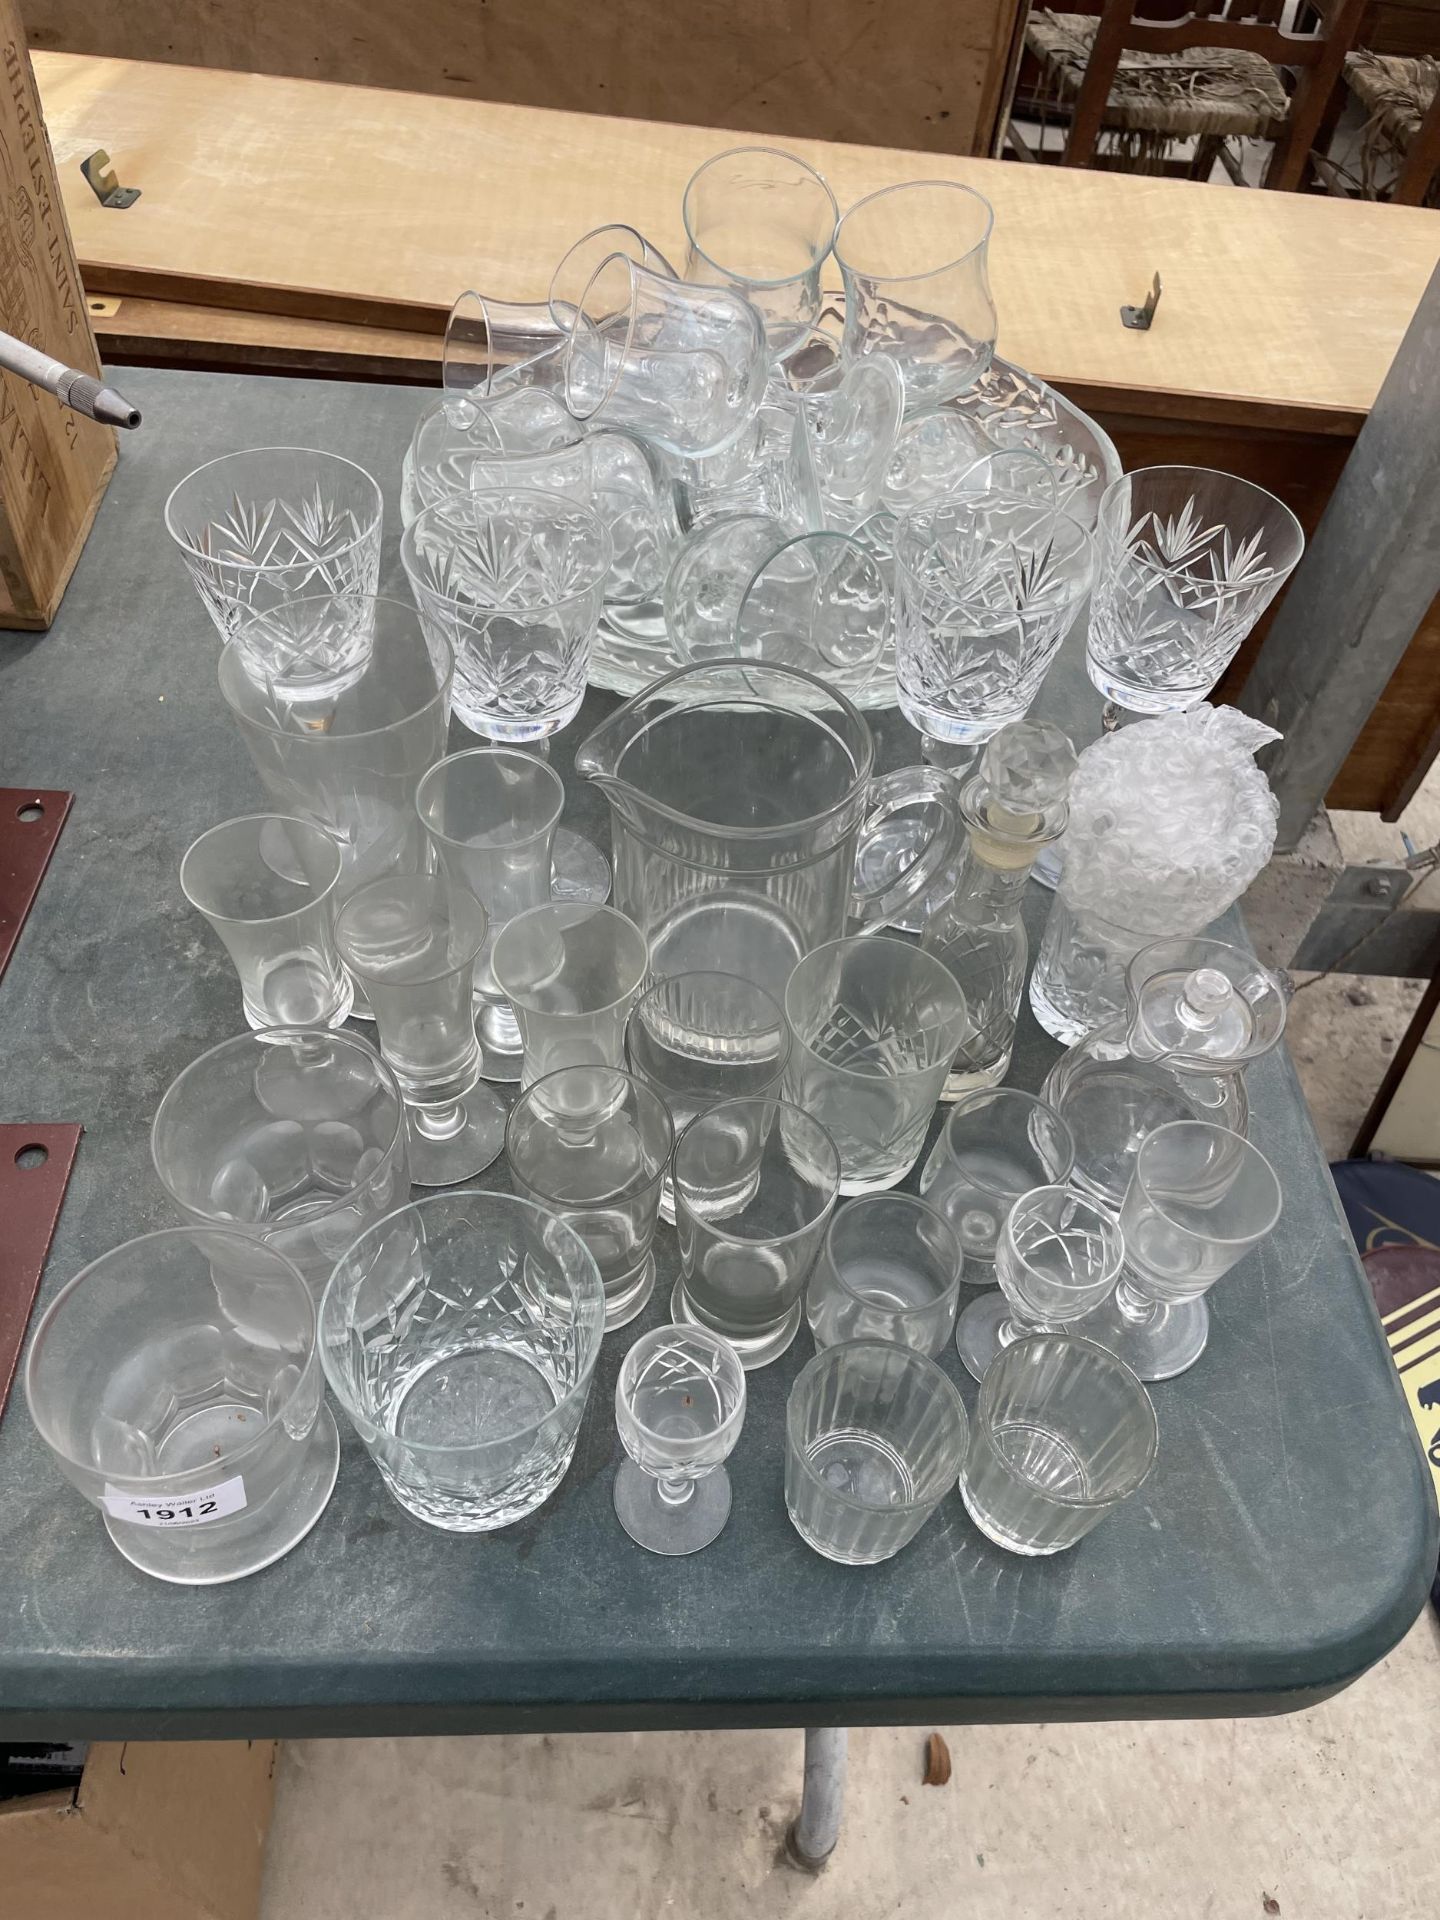 A LARGE QUANTITY OF GLASS WARE TO INCLUDE A BOWL AND WINE GLASSES